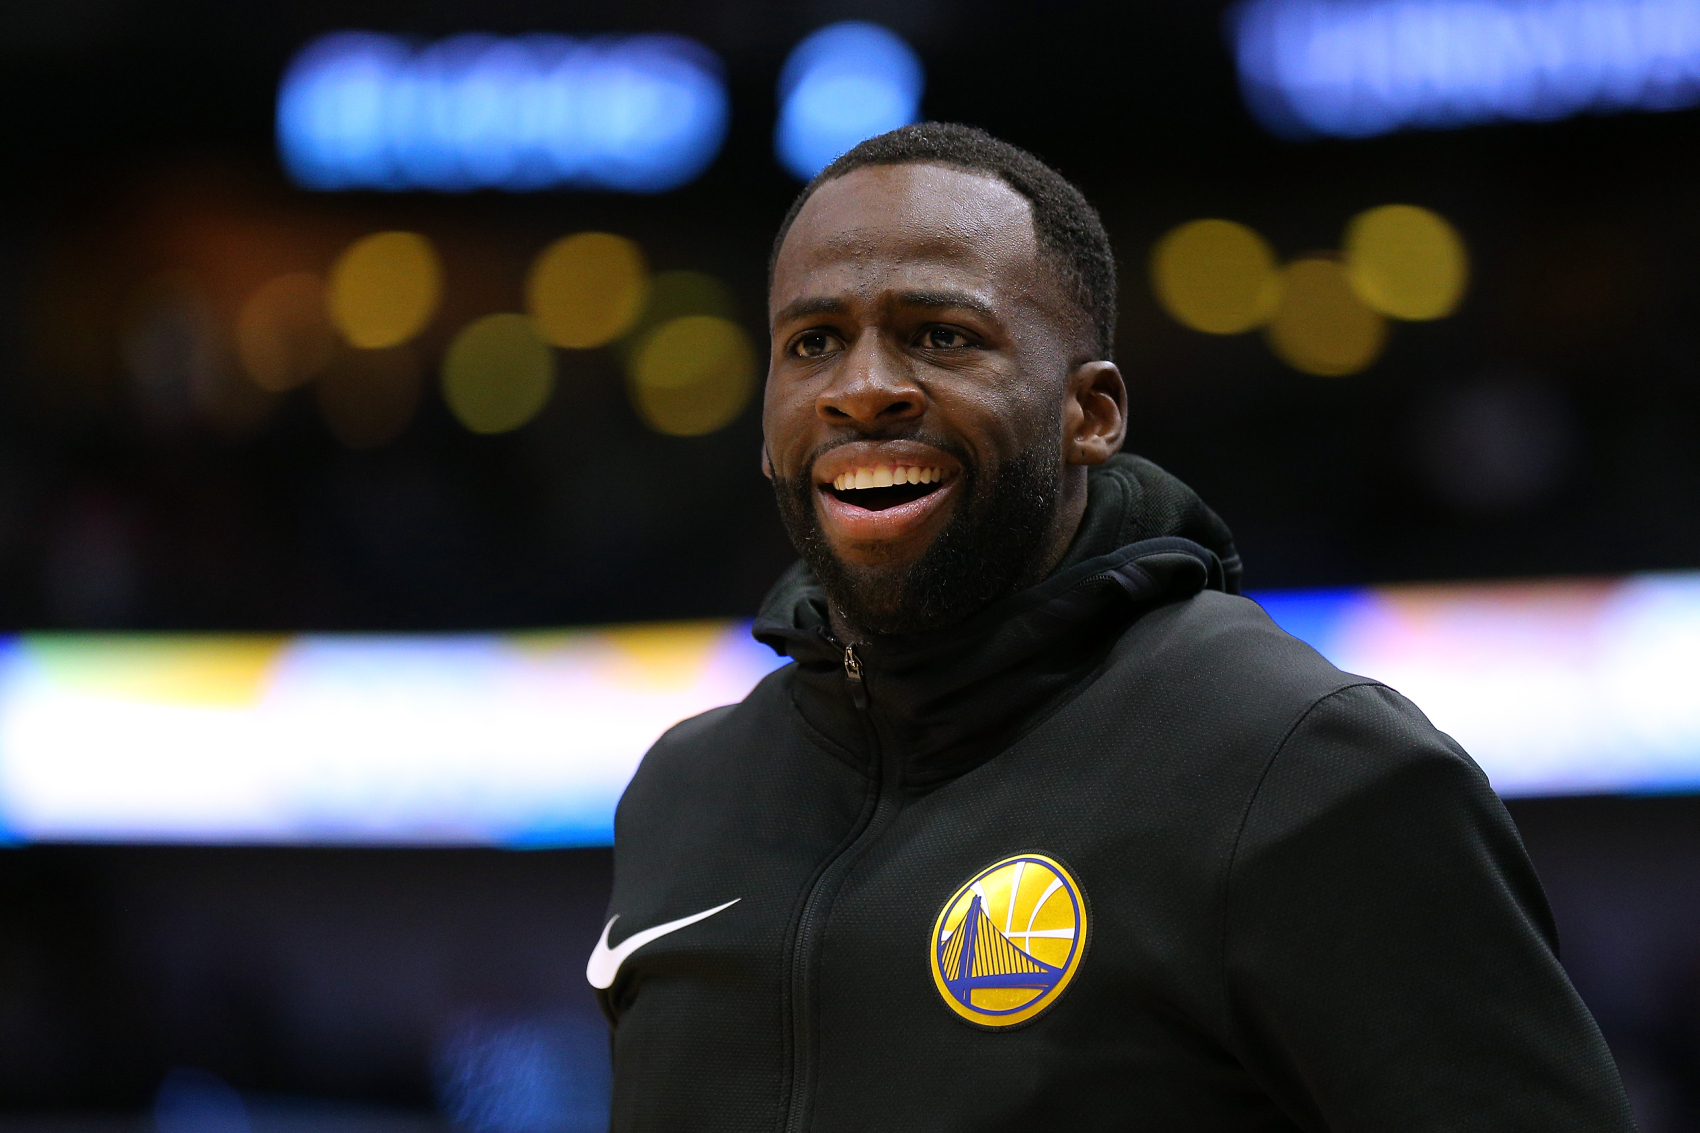 The NBA has fined Golden State Warriors star Draymond Green many times throughout the years. However, Green still has a massive net worth.